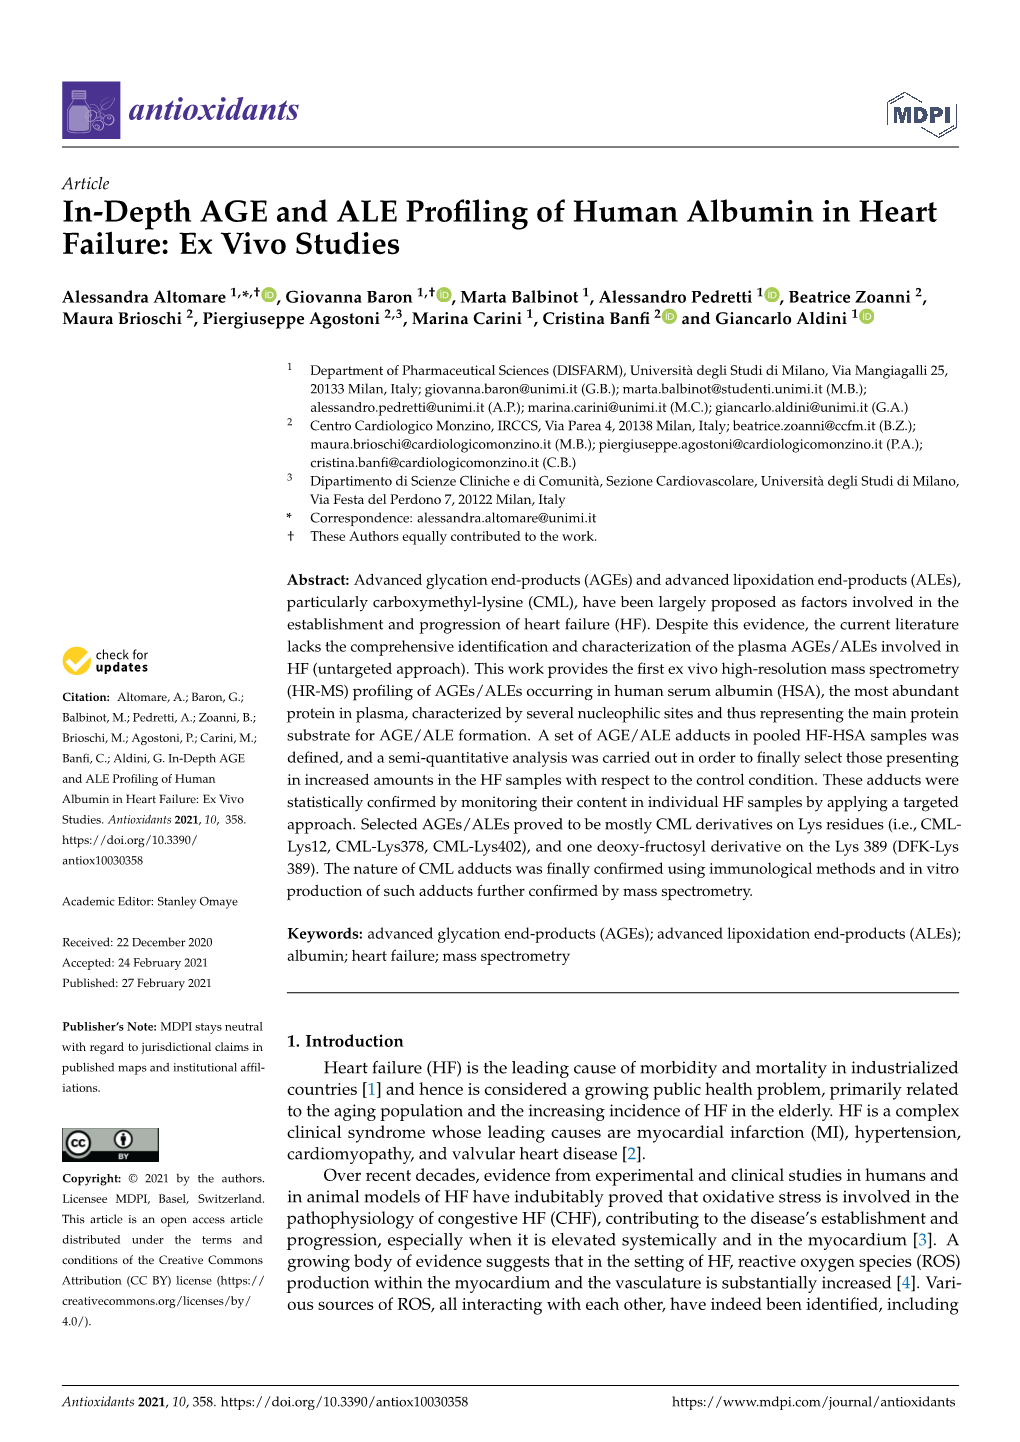 In-Depth AGE and ALE Profiling of Human Albumin in Heart Failure: Ex Vivo Studies